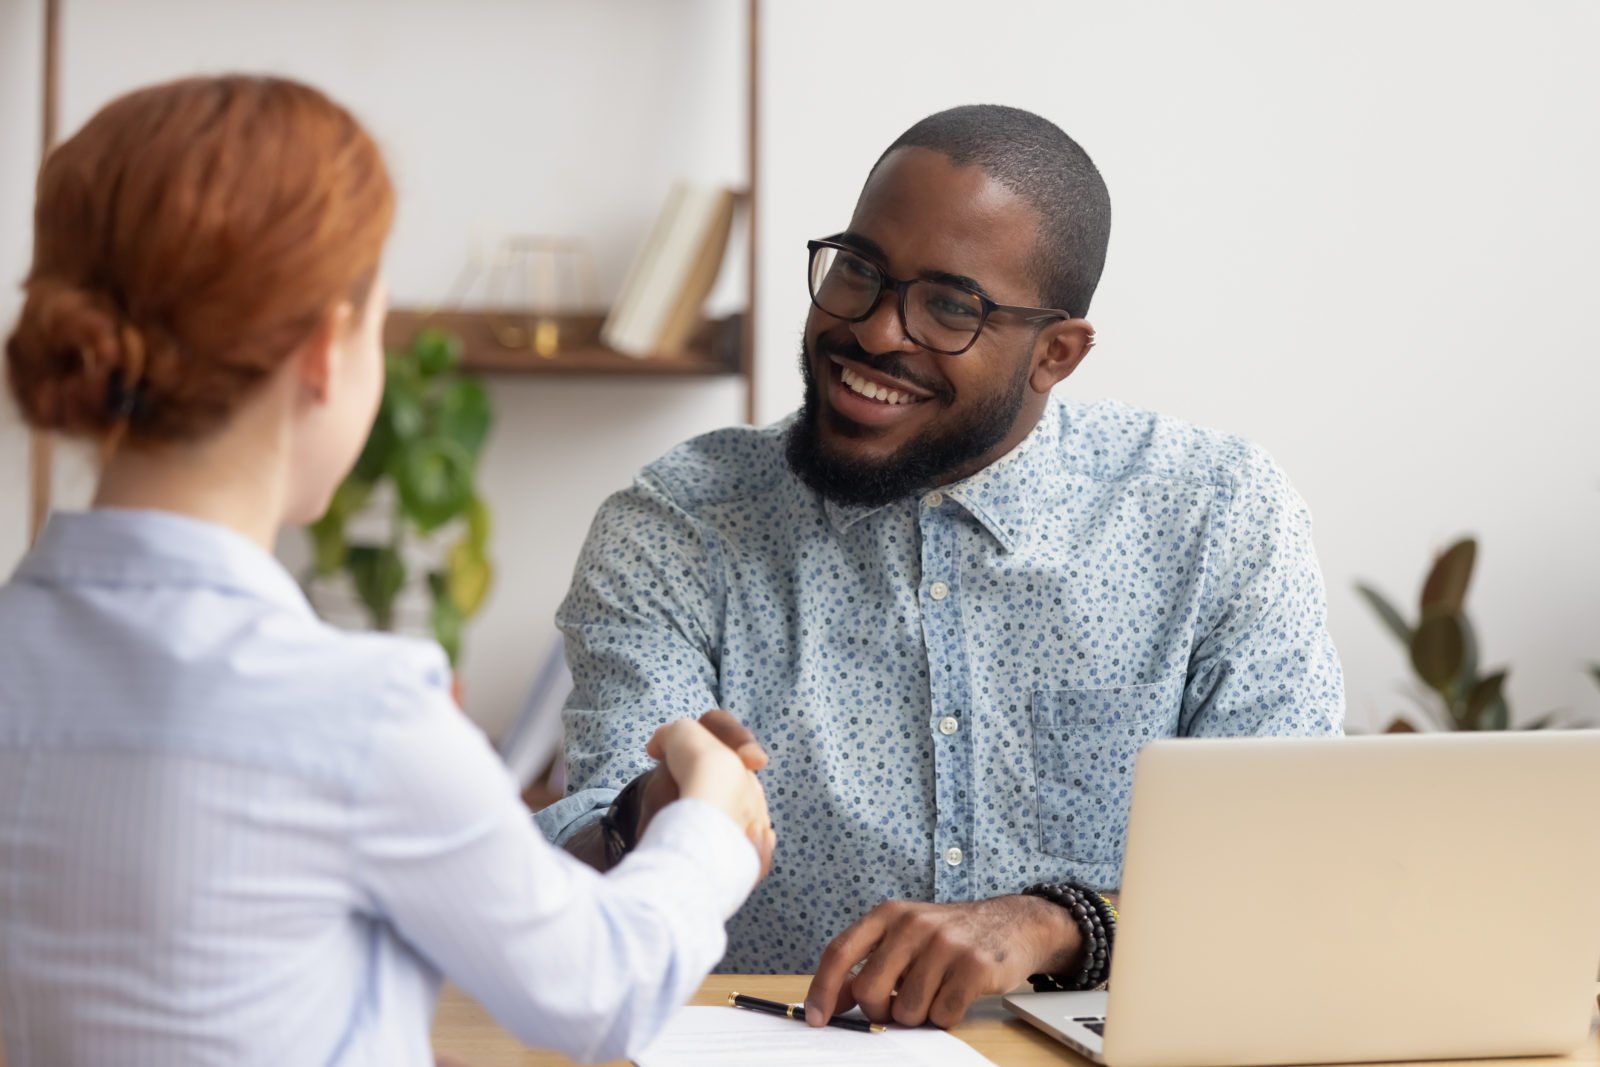 donor acquisition: Smiling African American hr manager shaking hand of candidate at job interview, hiring, greeting, good first impression concept, successful negotiation, friendly businessman handshaking with client